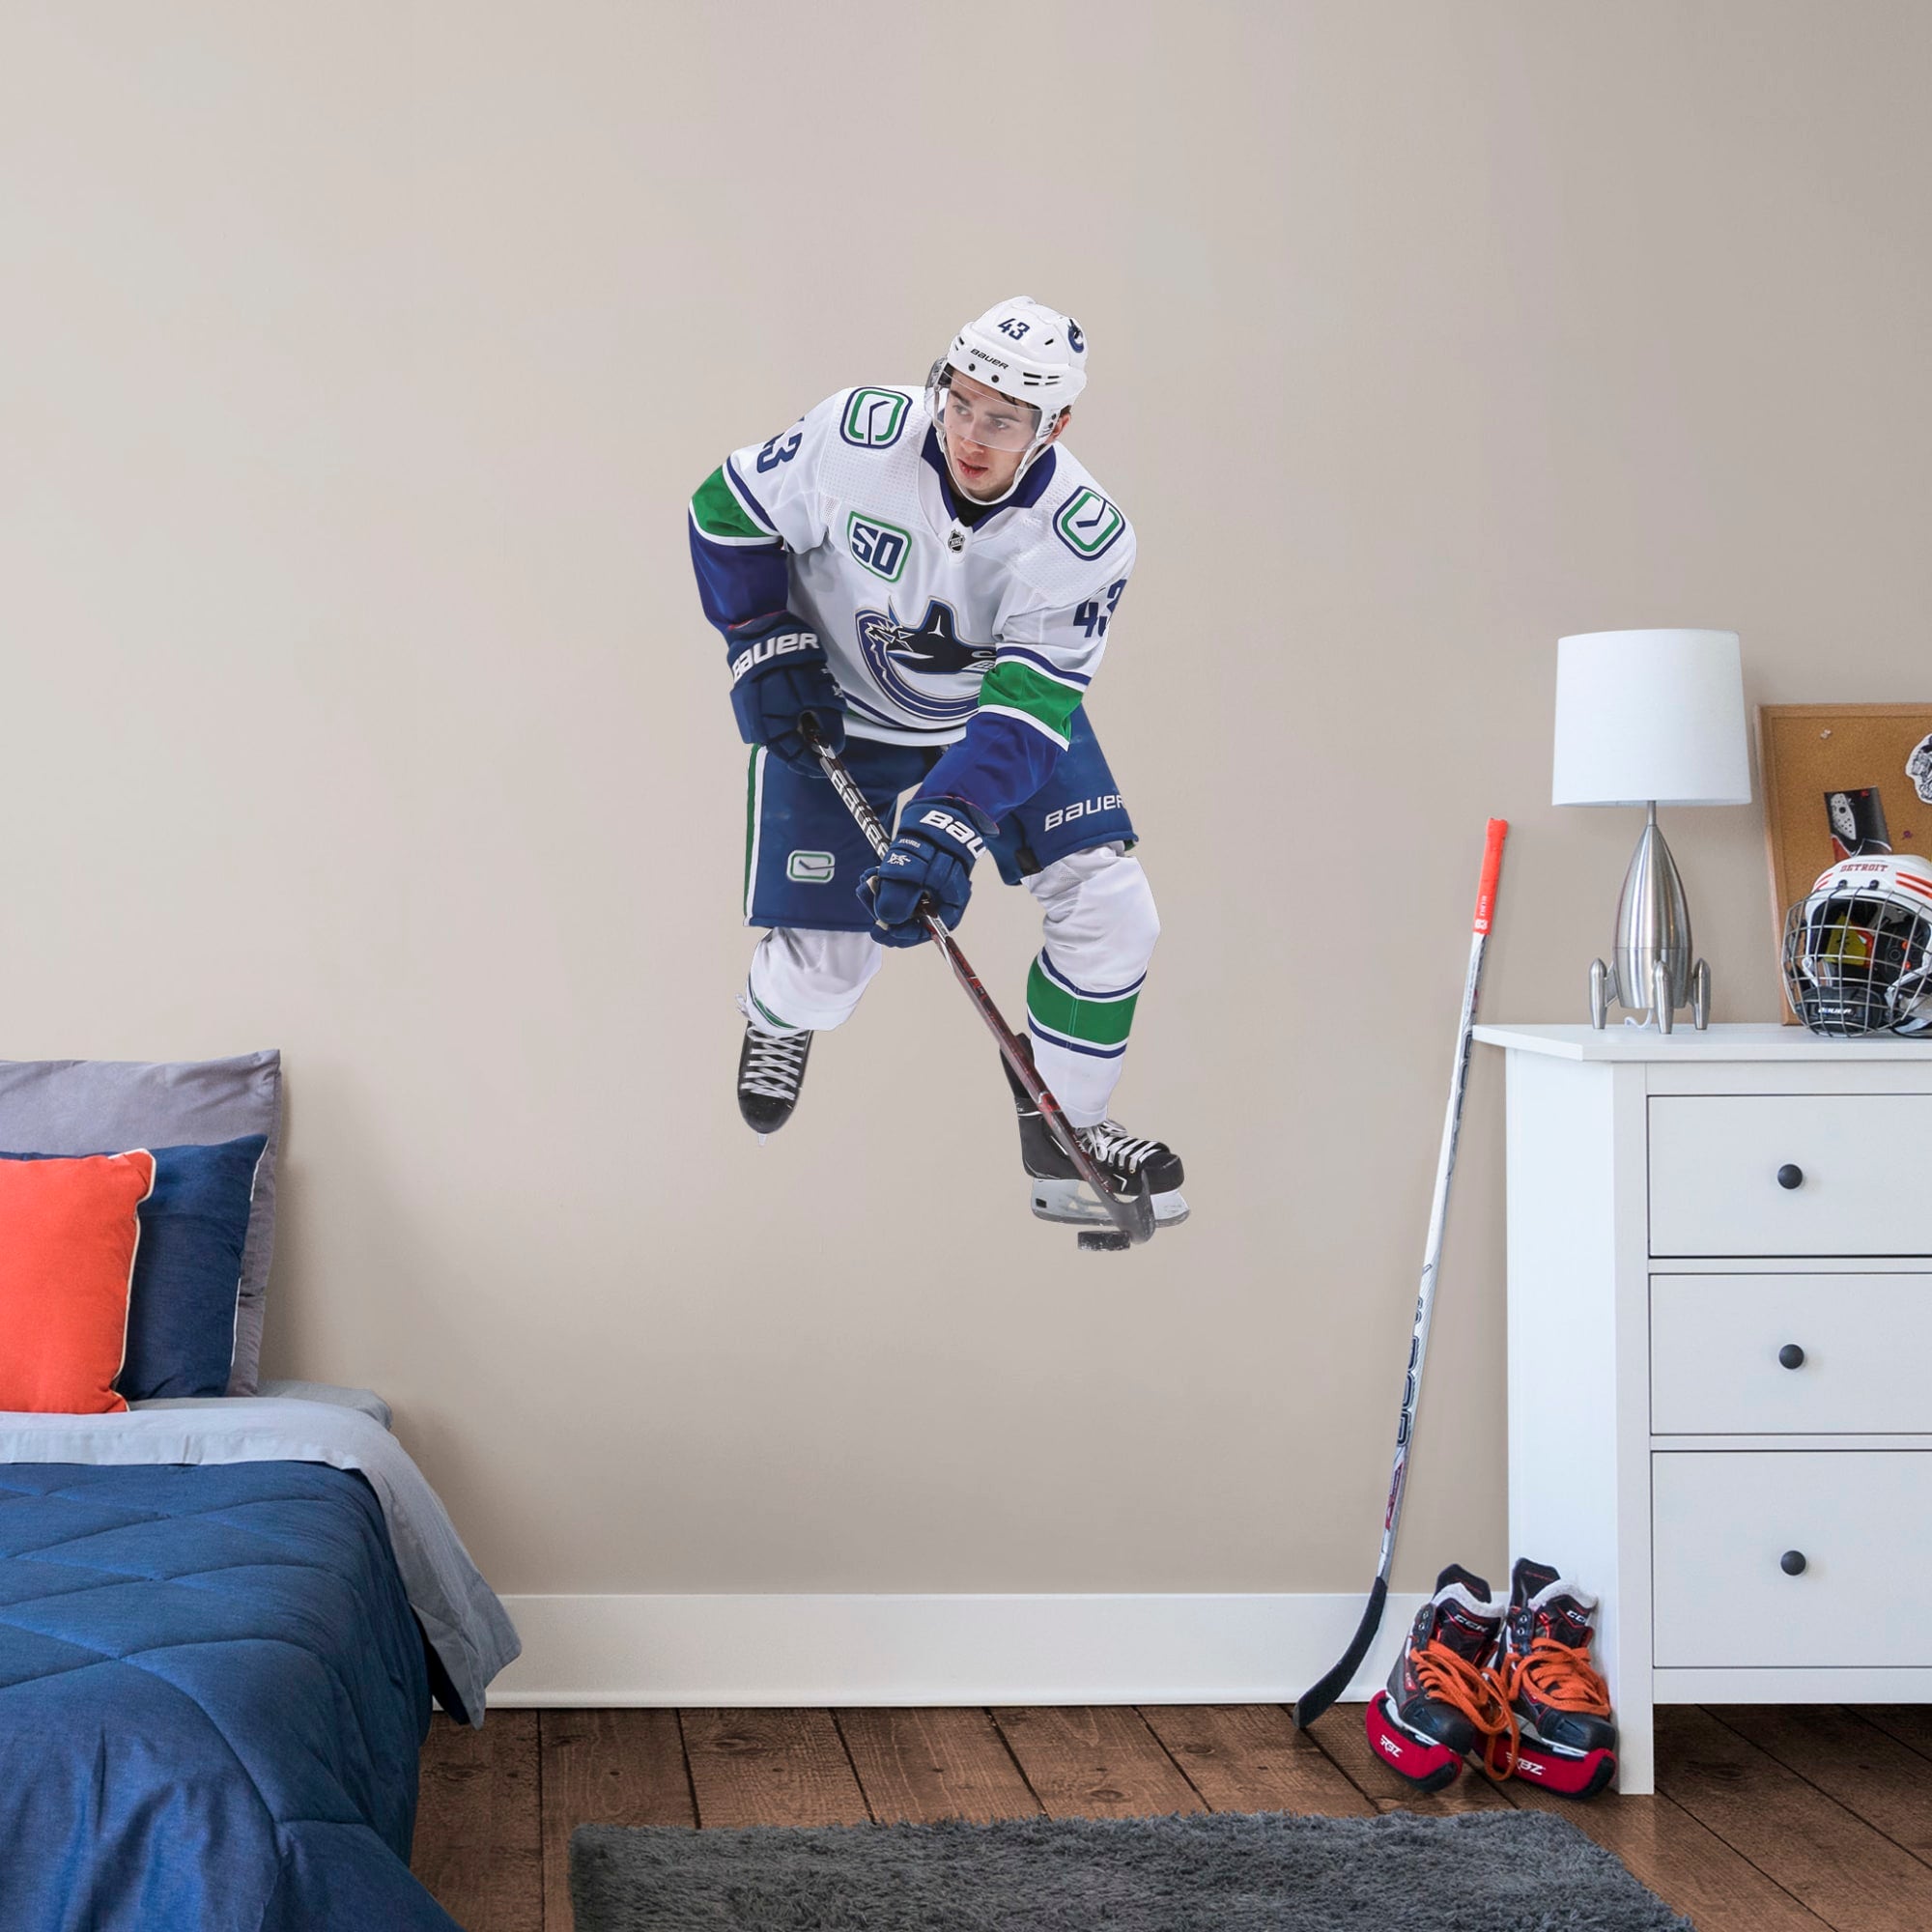 Quinn Hughes for Vancouver Canucks - Officially Licensed NHL Removable Wall Decal Giant Athlete + 2 Team Decals (27"W x 51"H) by